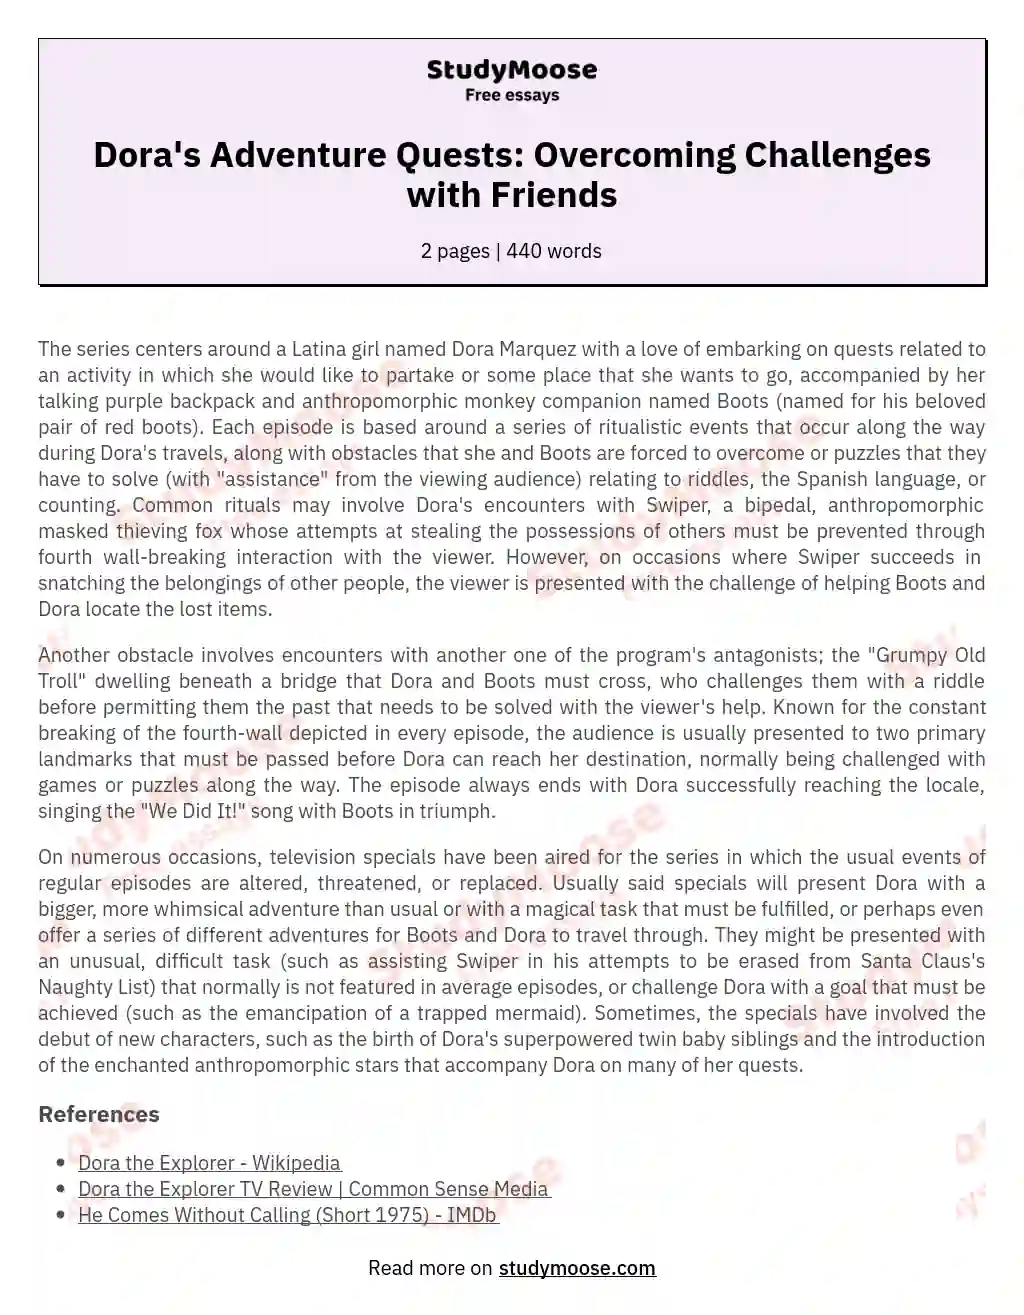 Dora's Adventure Quests: Overcoming Challenges with Friends essay